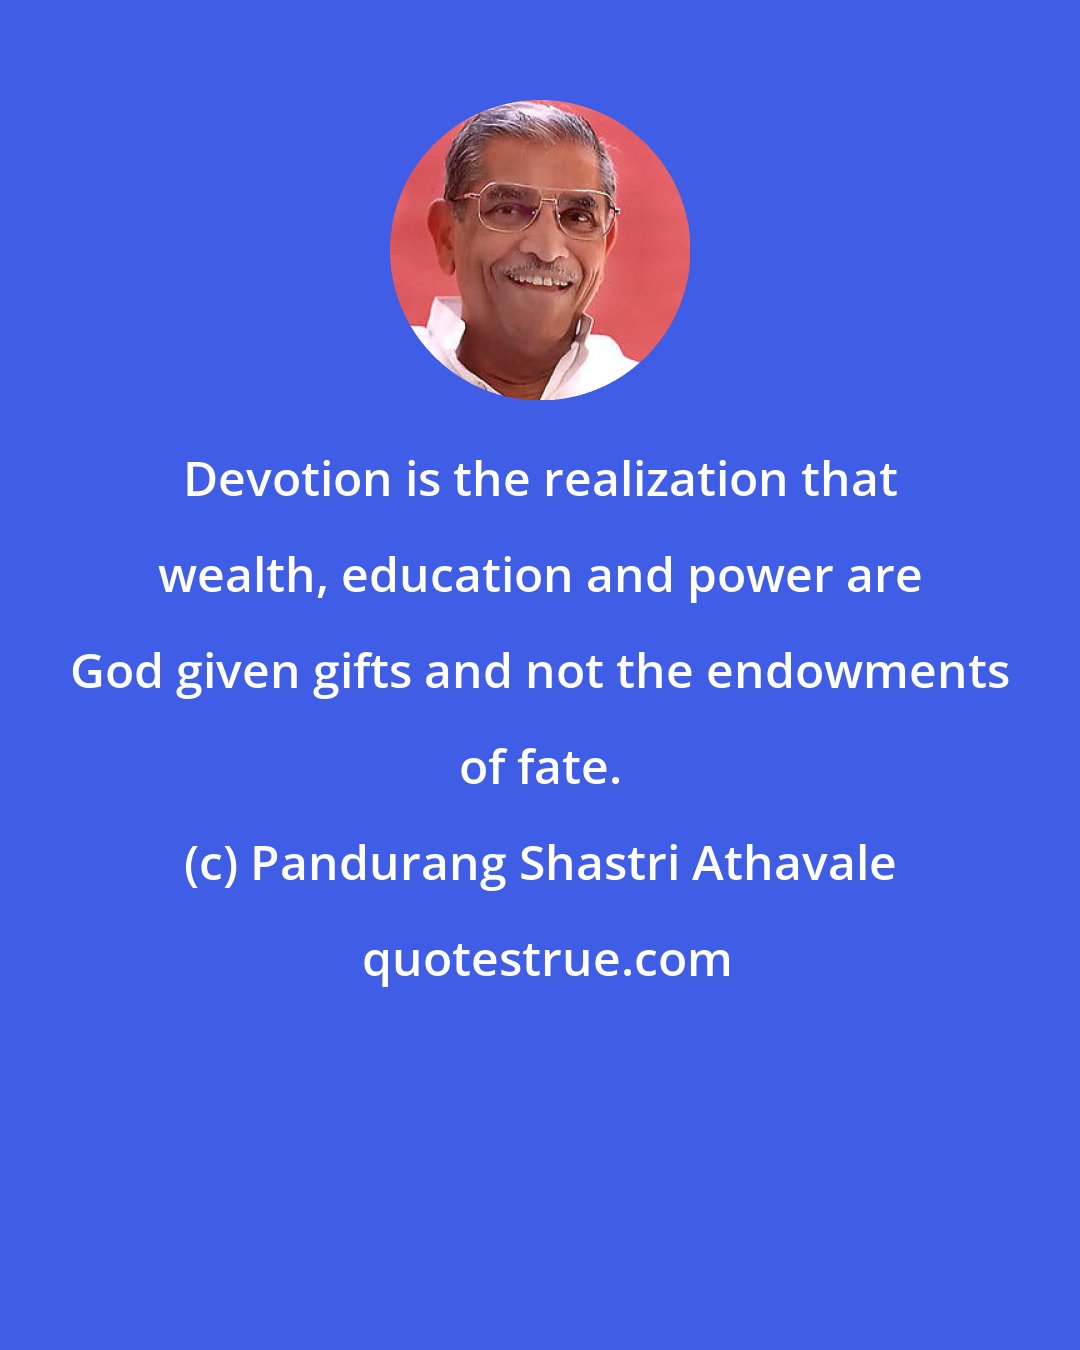 Pandurang Shastri Athavale: Devotion is the realization that wealth, education and power are God given gifts and not the endowments of fate.